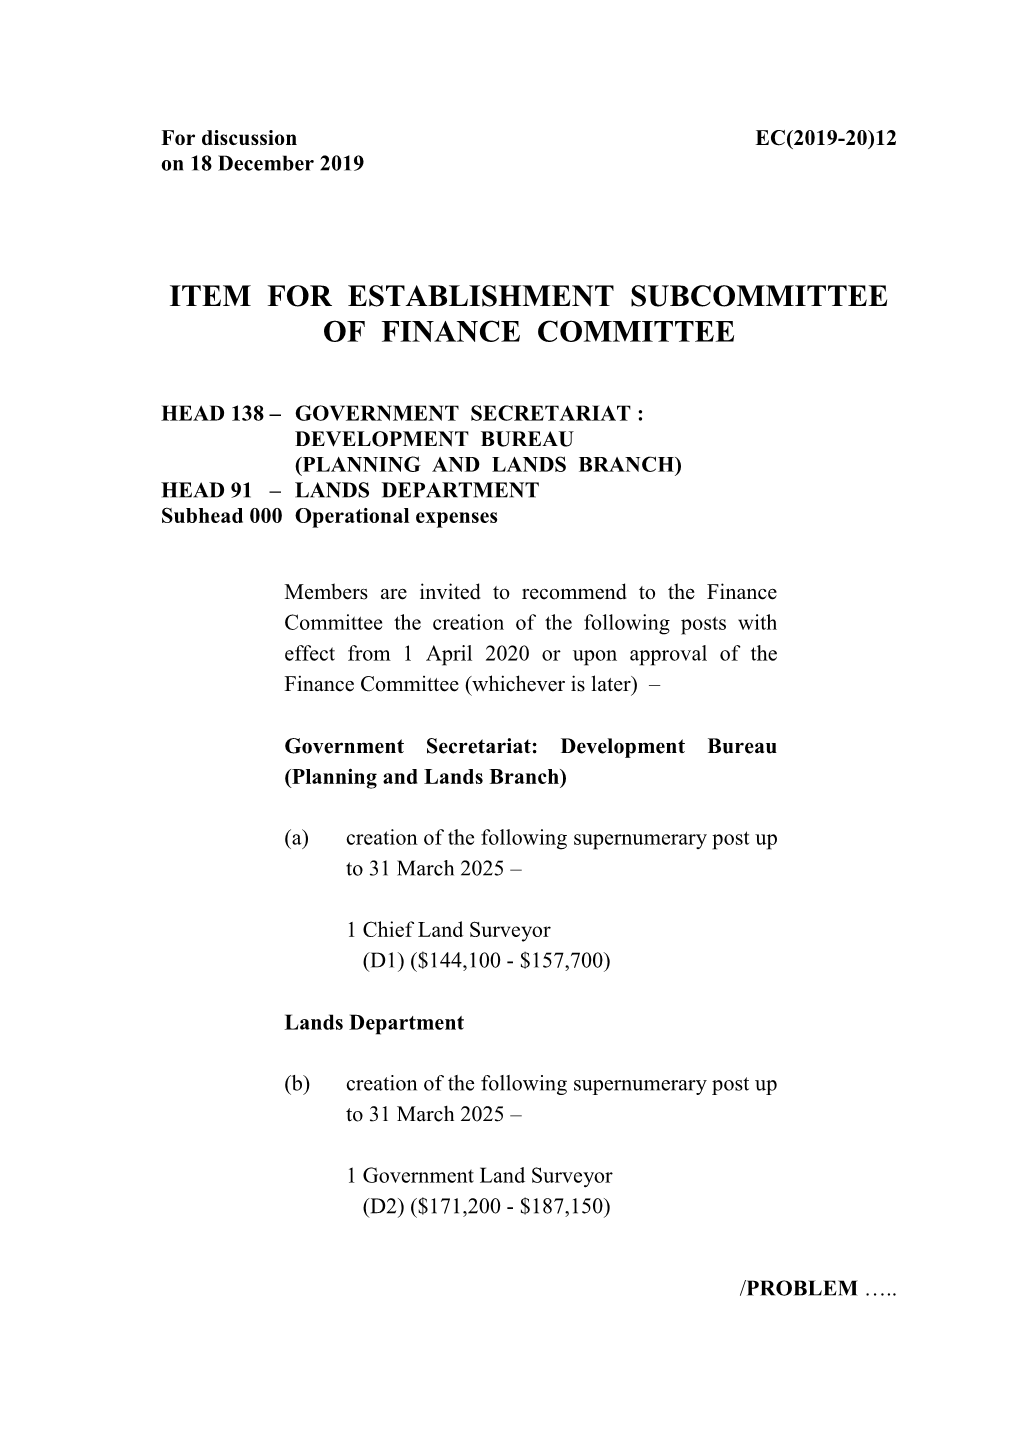 Item for Establishment Subcommittee of Finance Committee